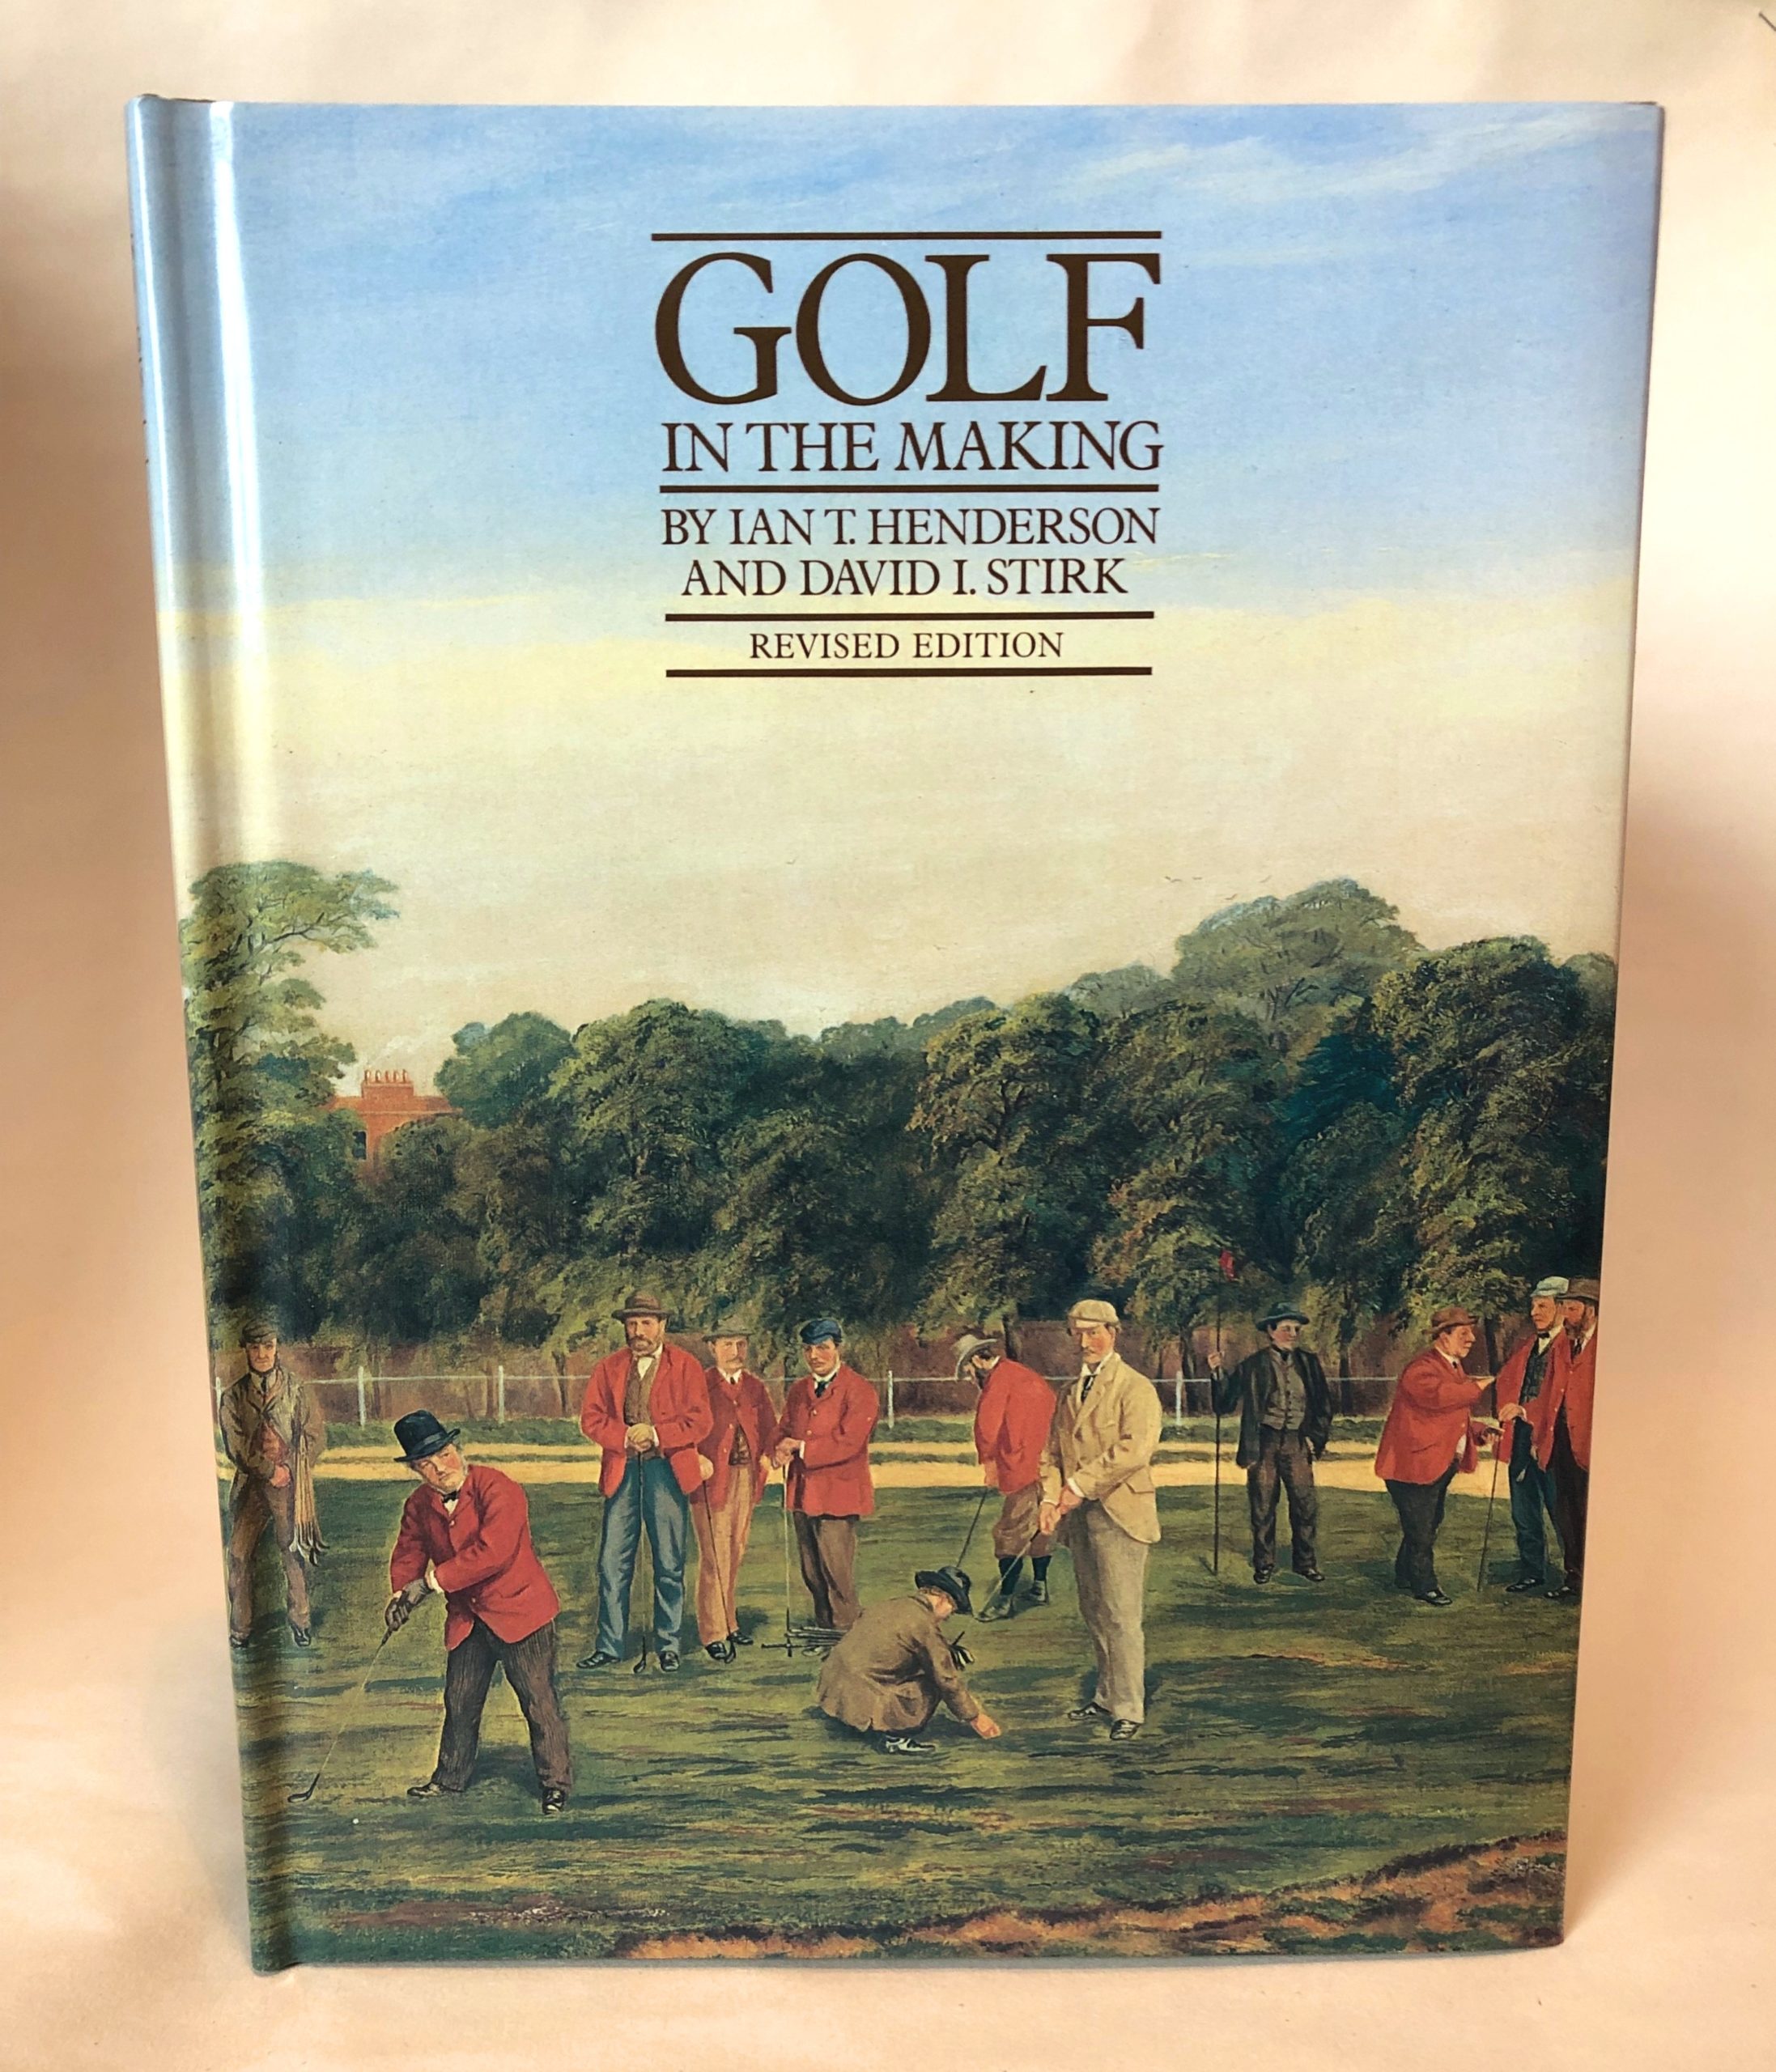 Golf In The Making by Ian T. Henderson and David I. Stirk